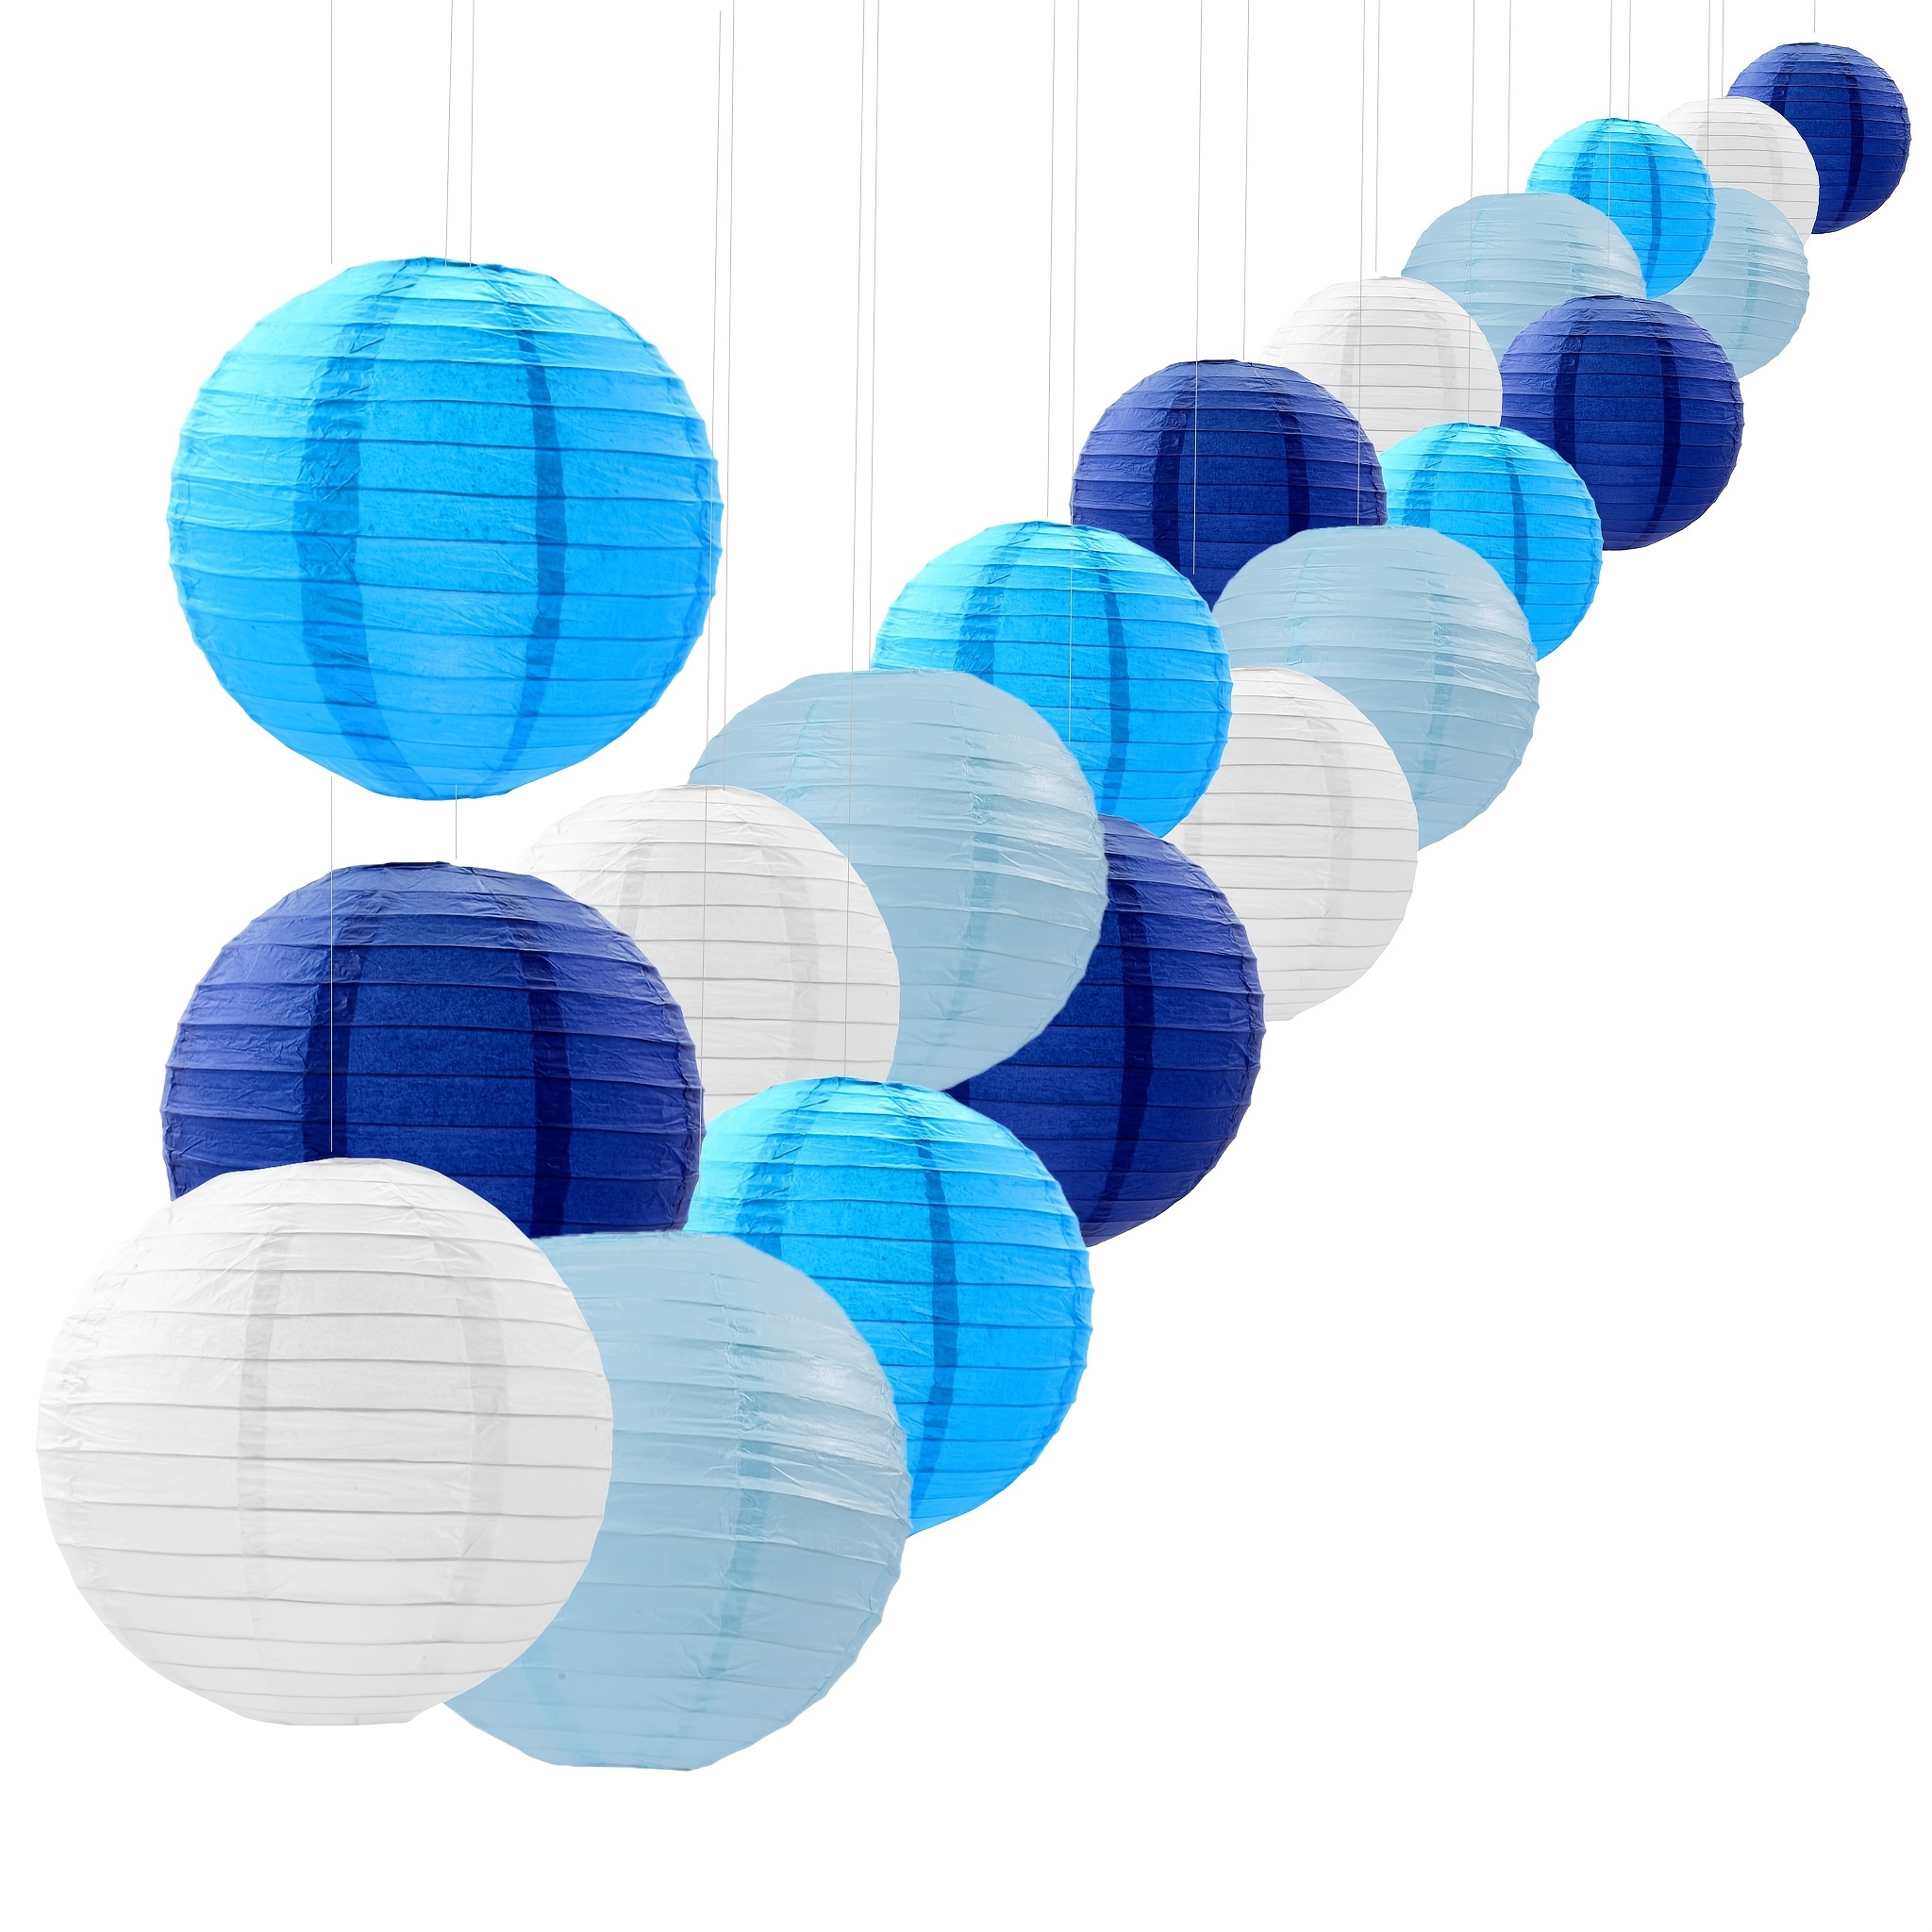 

21pack Blue Paper Lanterns Wedding Party Decoration Set, Reusable Easy Assemble, Hanging Pastel Japanese Lantern Lamp, For Birthday, Baby Shower Party Favor